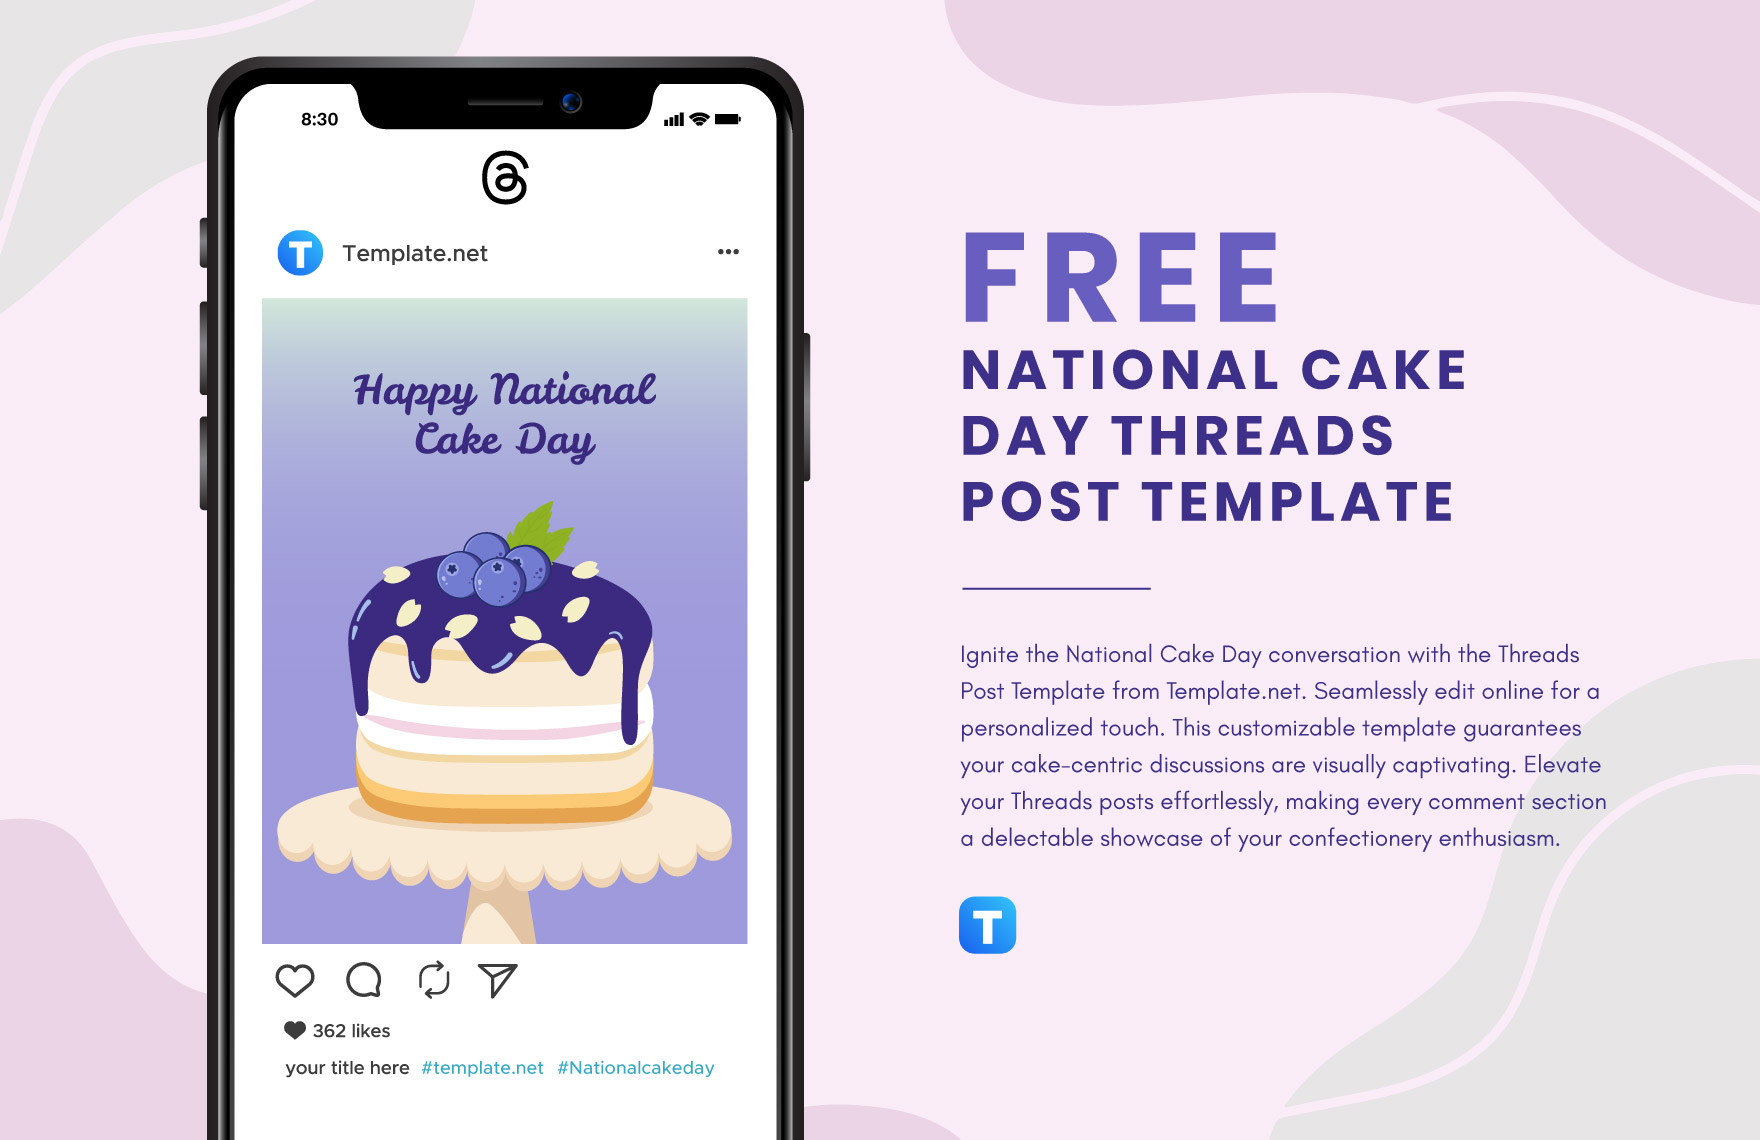 National Cake Day Threads Post